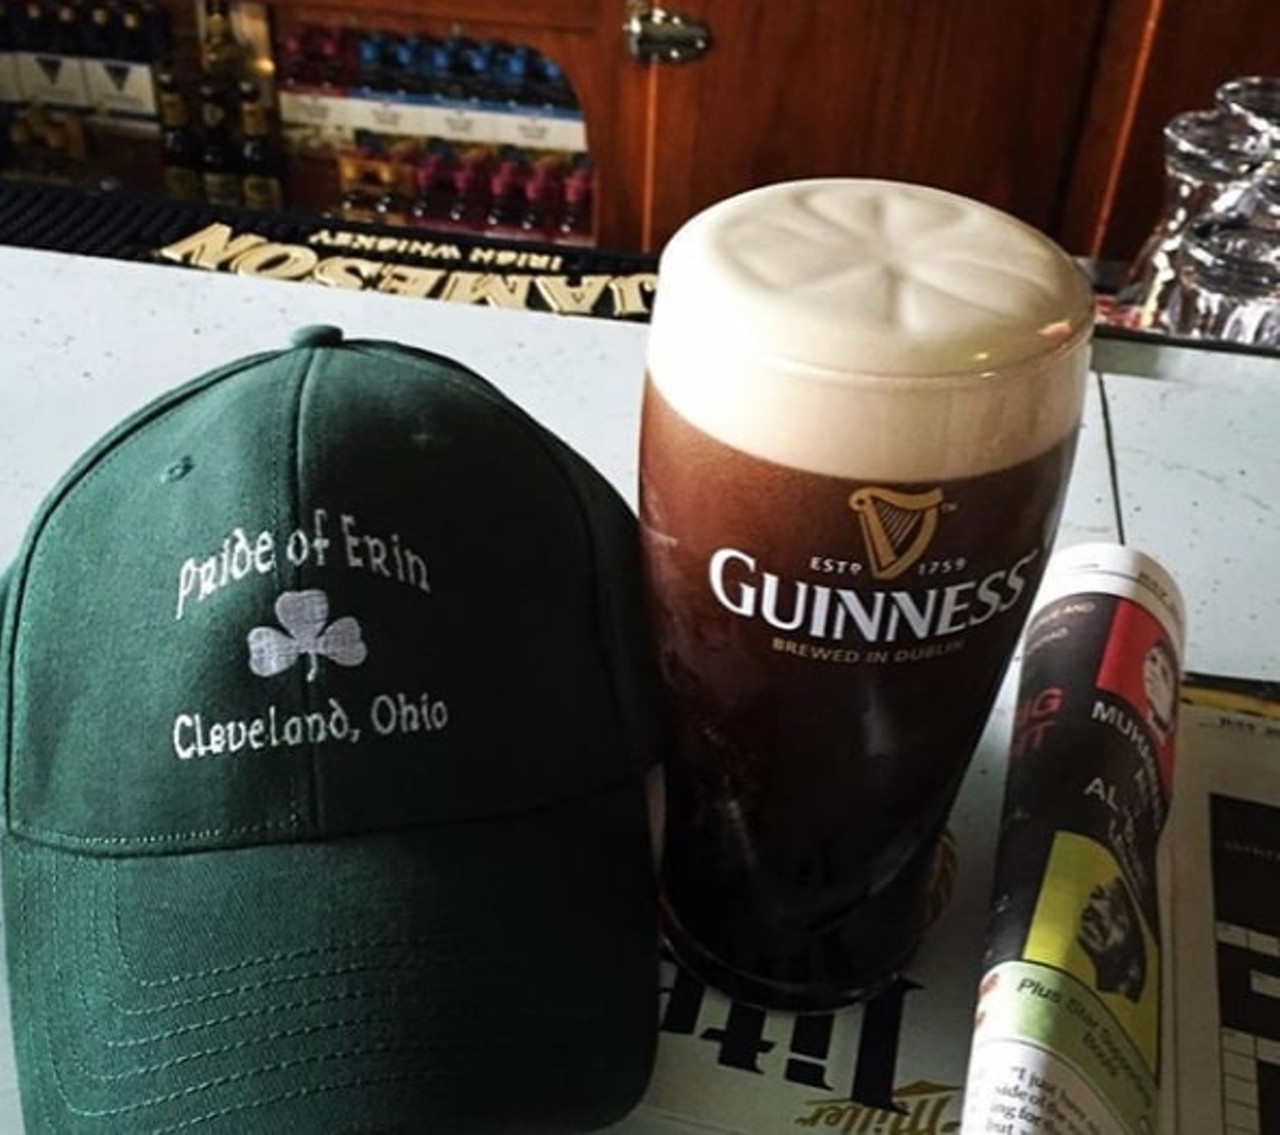 Pride of Erin
12228 Lorain Ave., 216-251-2922
A Cleveland classic, the Pride of Erin boasts being the first bar in Cleveland to put Guinness on tap. Time to pay homage.    
Photo via msmcclain_/Instagram